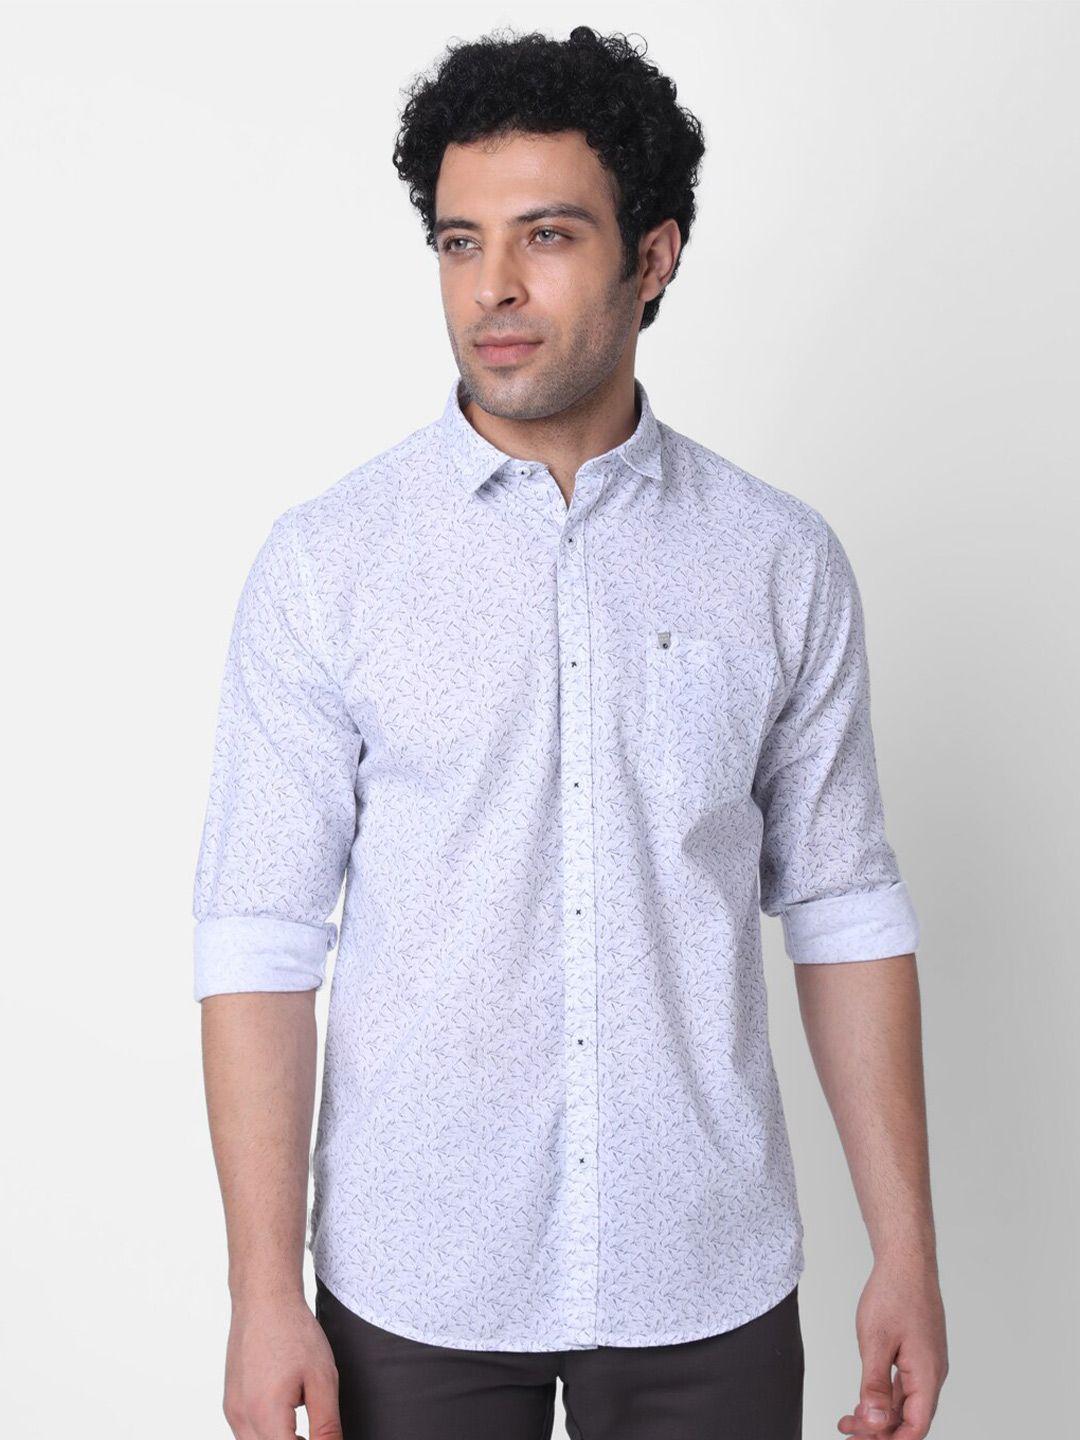 oxemberg-classic-slim-fit-floral-printed-casual-cotton-shirt